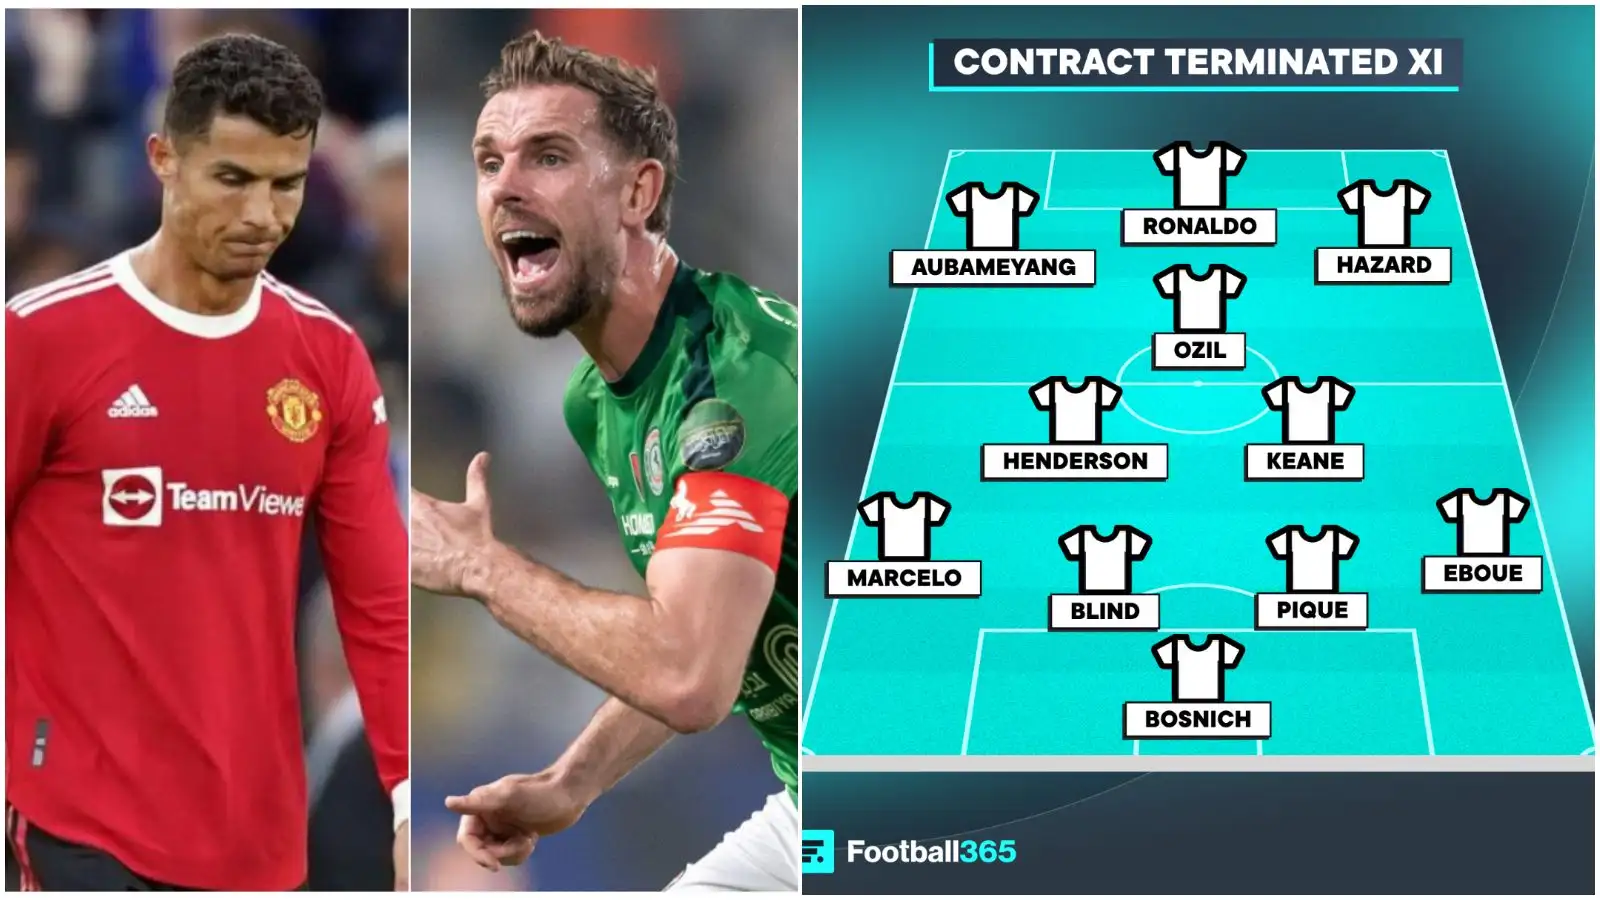 Jordan Henderson joins Manchester United trio in XI of players who had their contract terminated